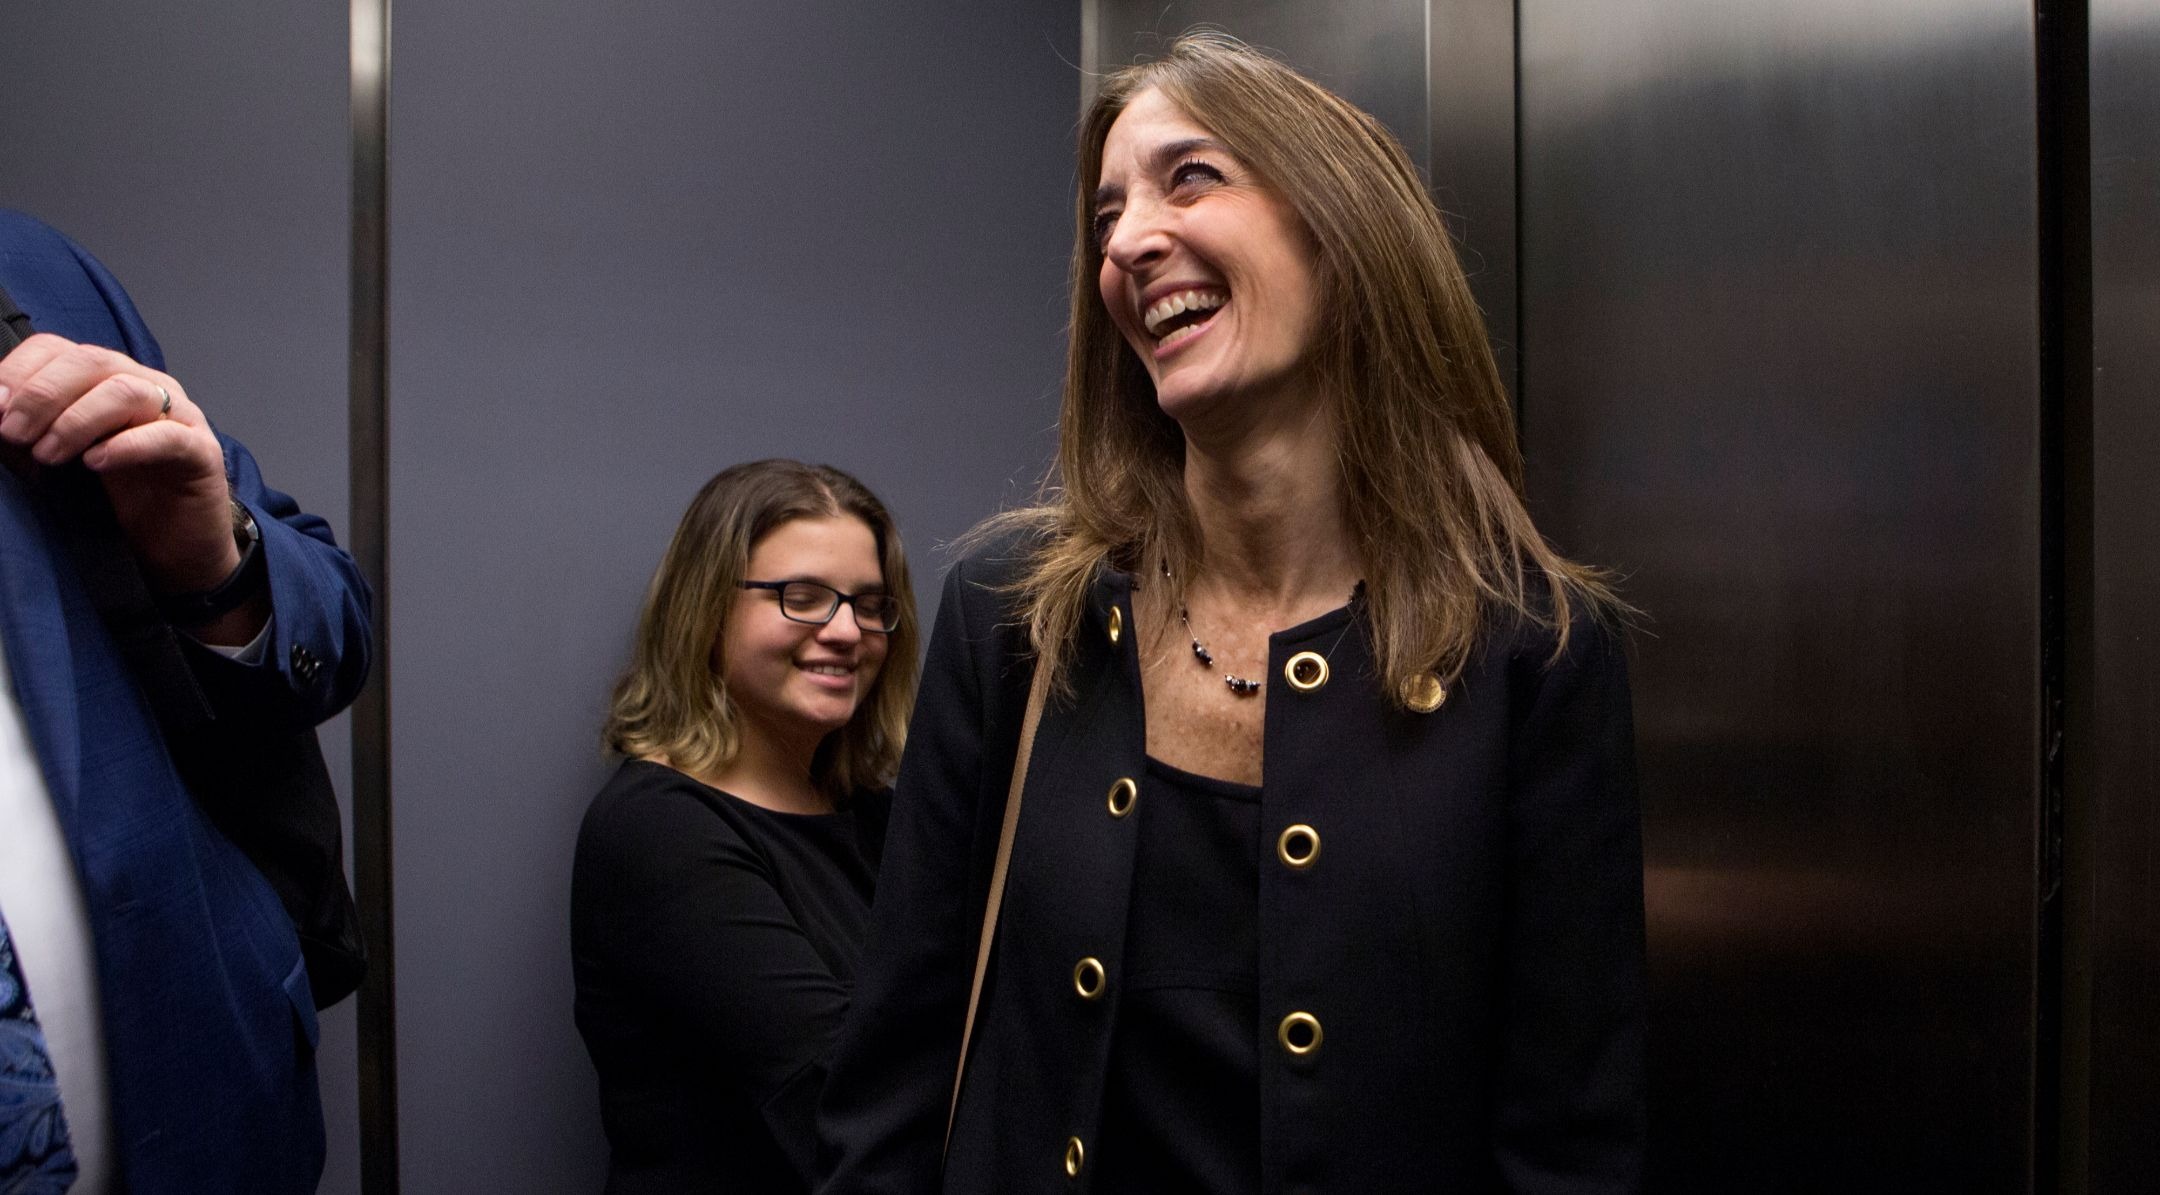 Democrat Eileen Filler-Corn of Fairfax County rides the elevator down from her office in the Pocahontas Building in Richmond, Virginia, Dec. 18, 2018. (Julia Rendleman for the Washington Post)